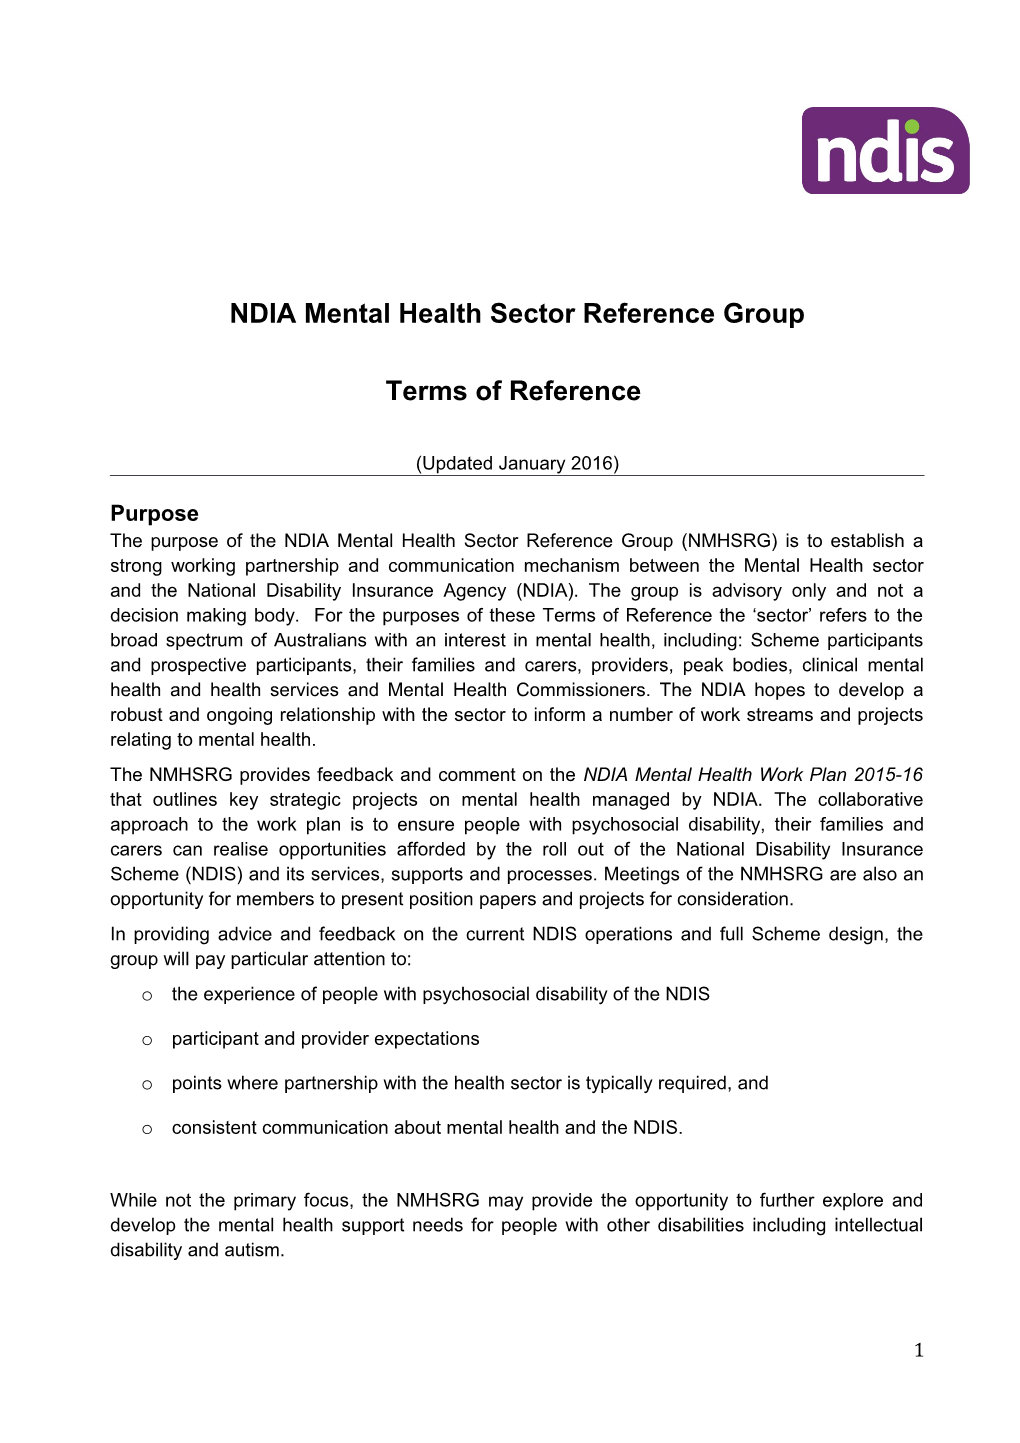 NDIA Mental Health Sector Reference Group